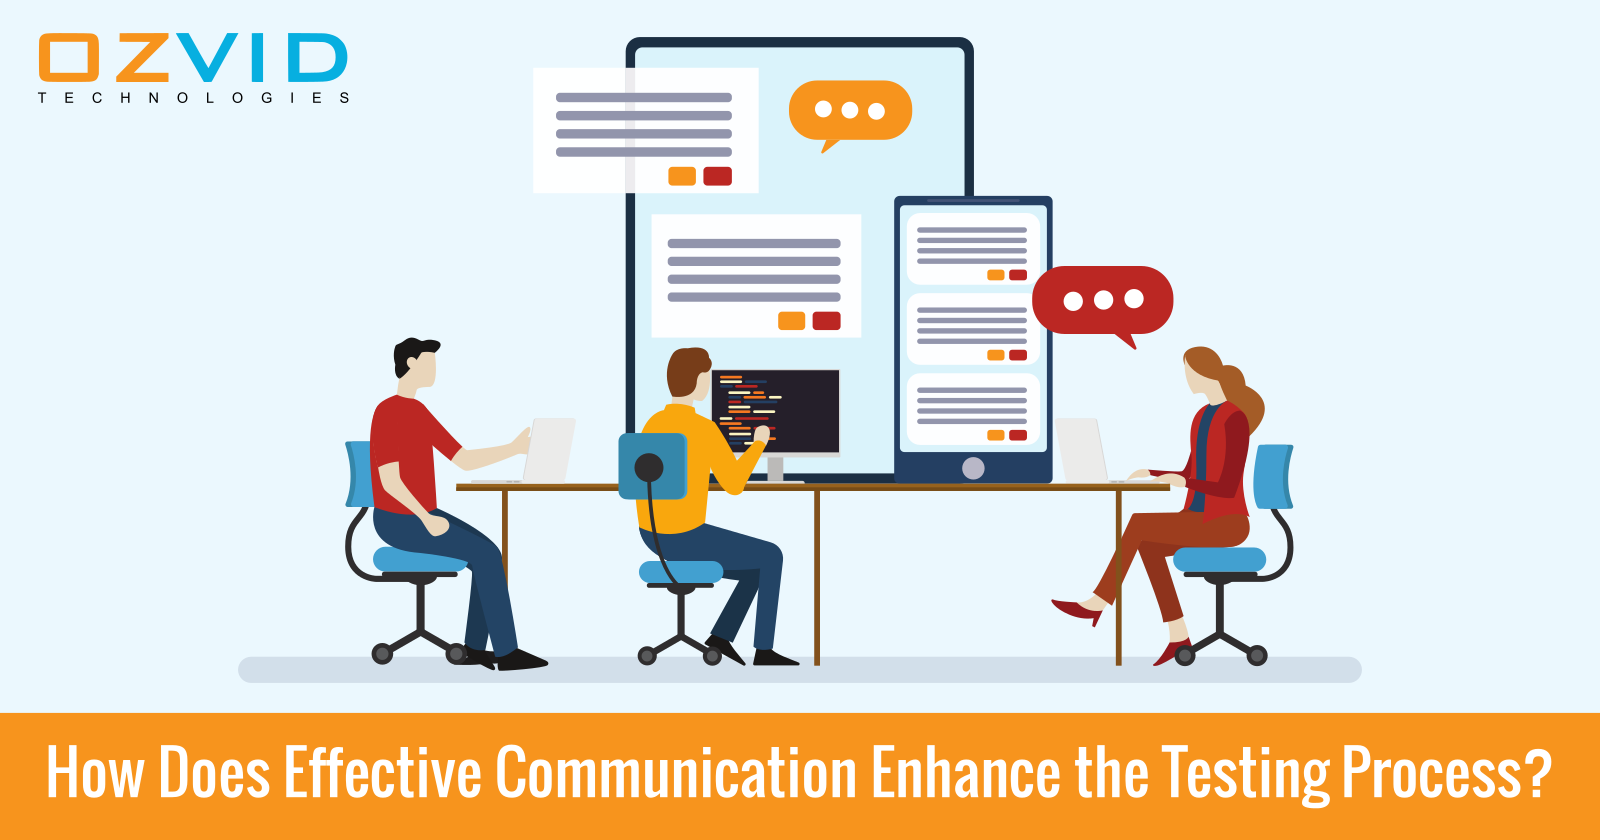 How Does Effective Communication Enhance the Testing Process?